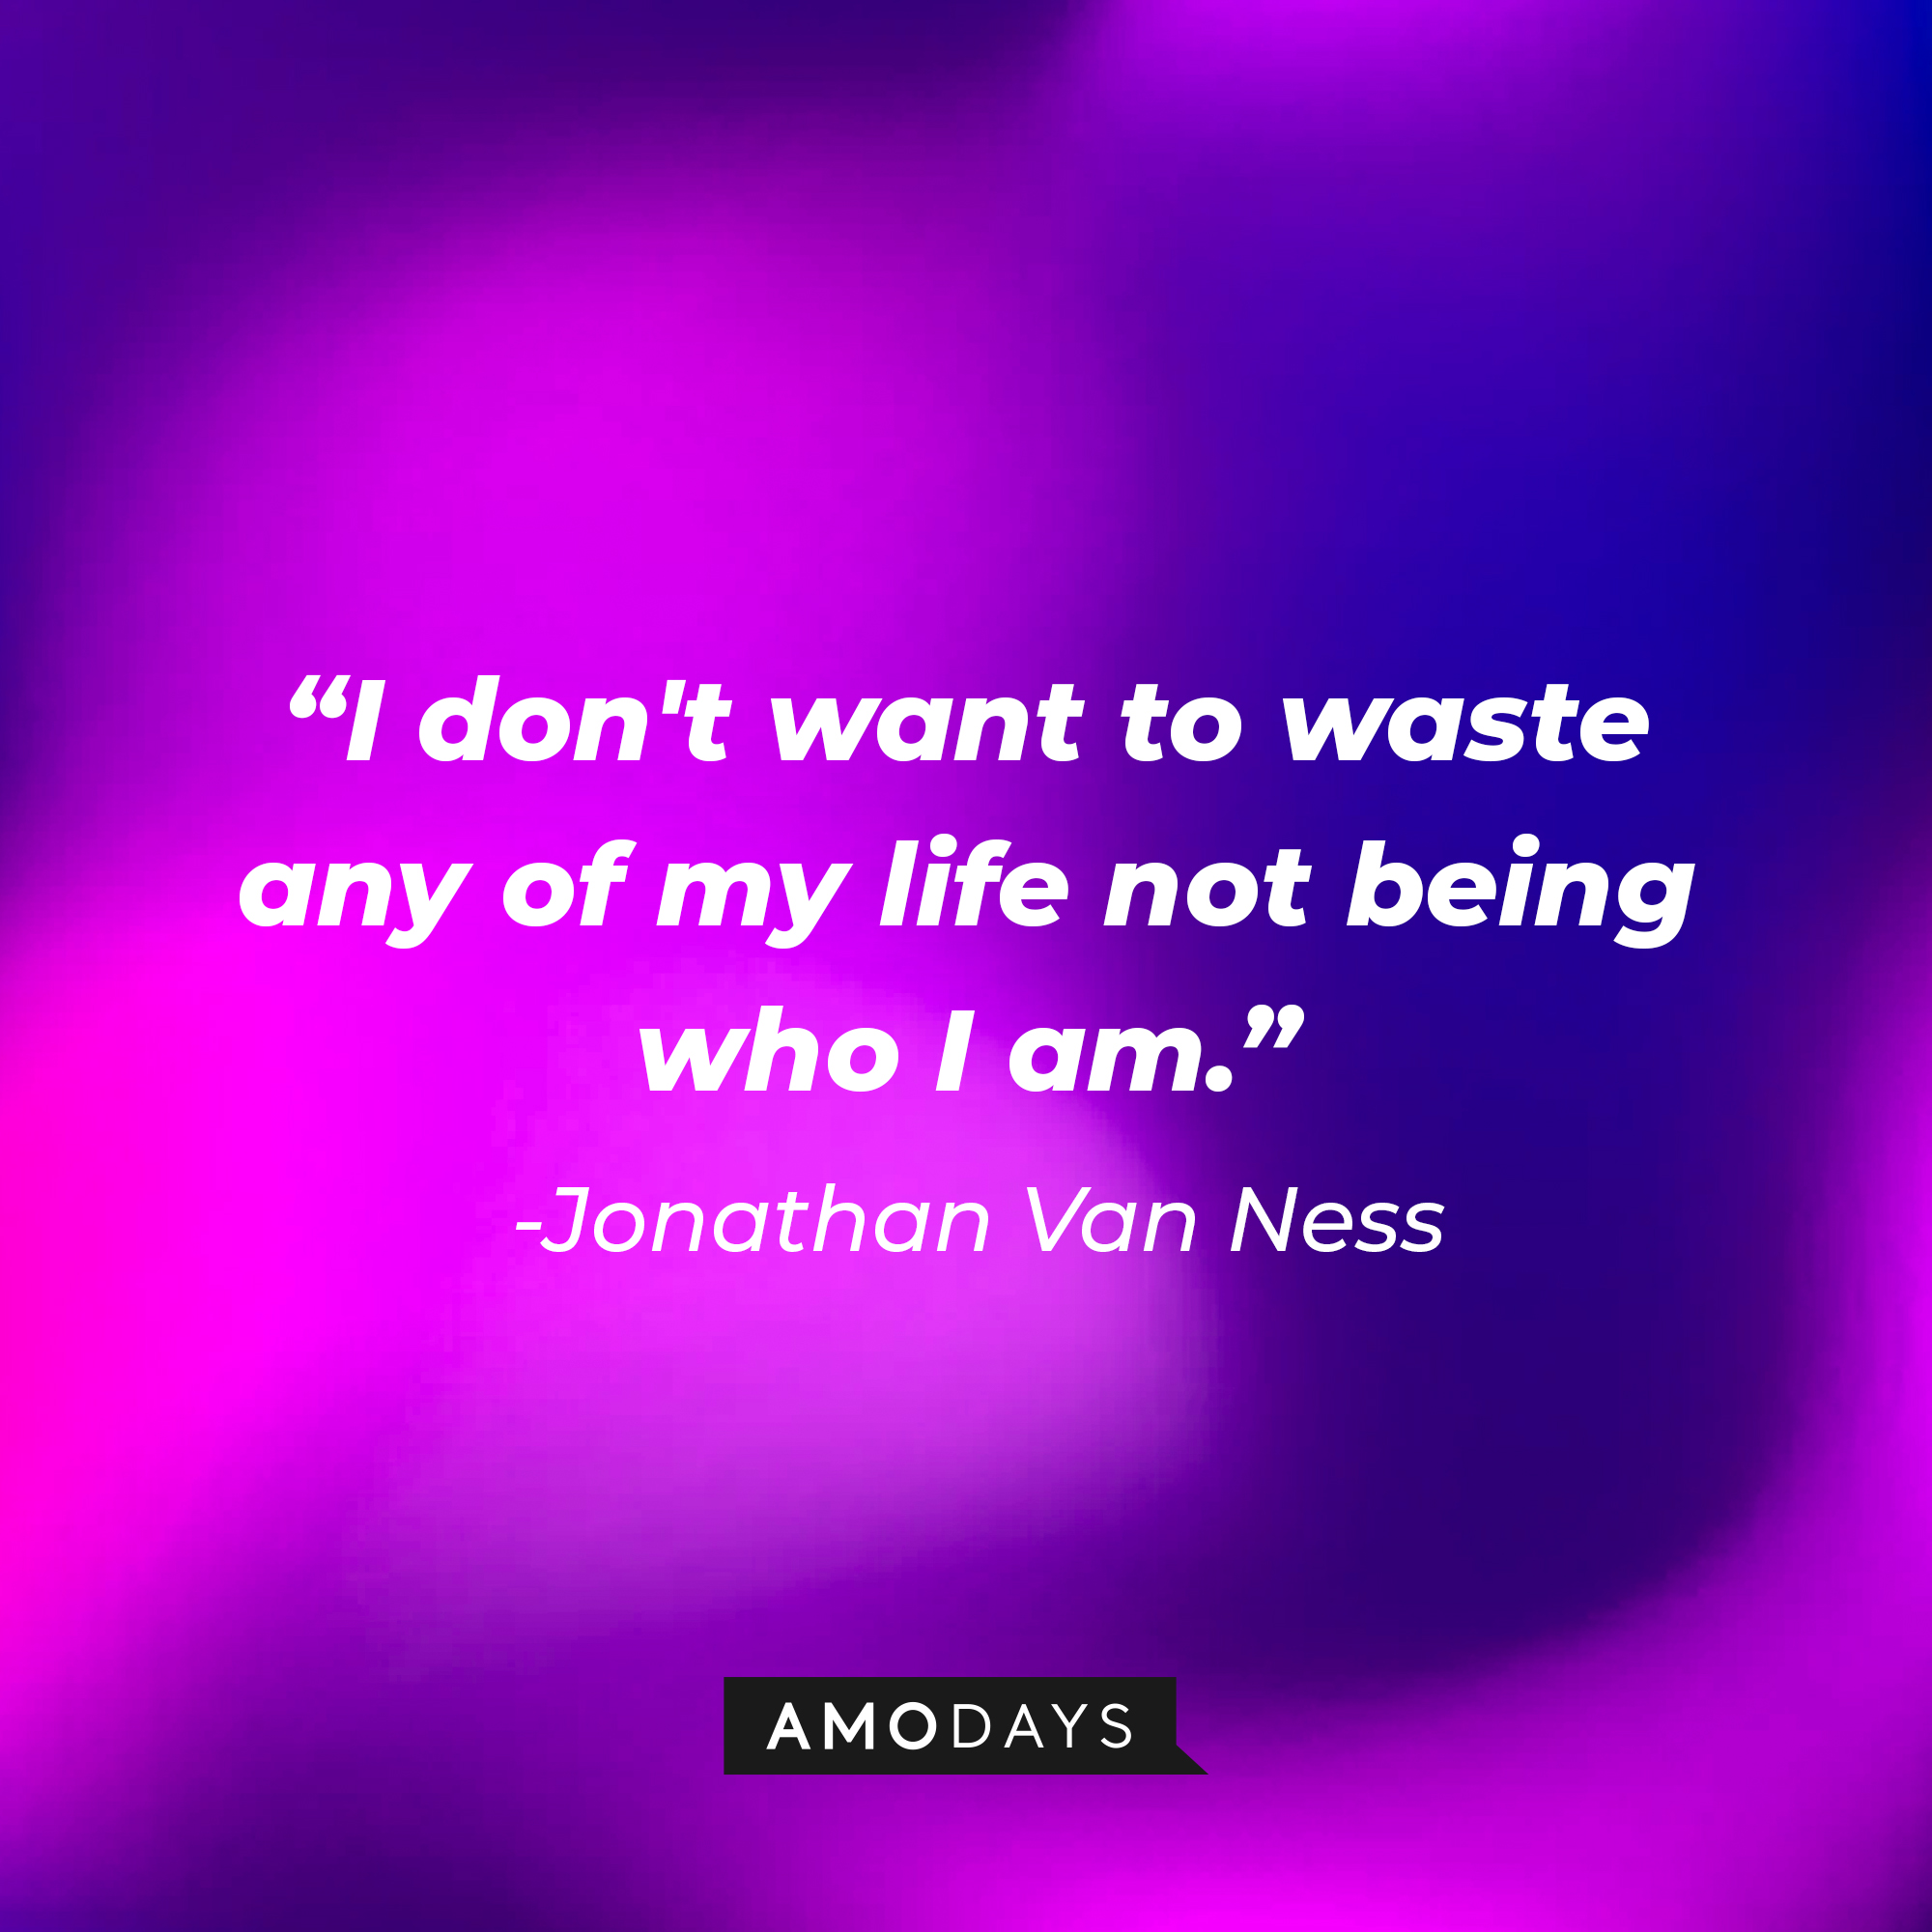 Jonathan Van Ness’ quote: "I don't want to waste any of my life not being who I am." | Image: AmoDays